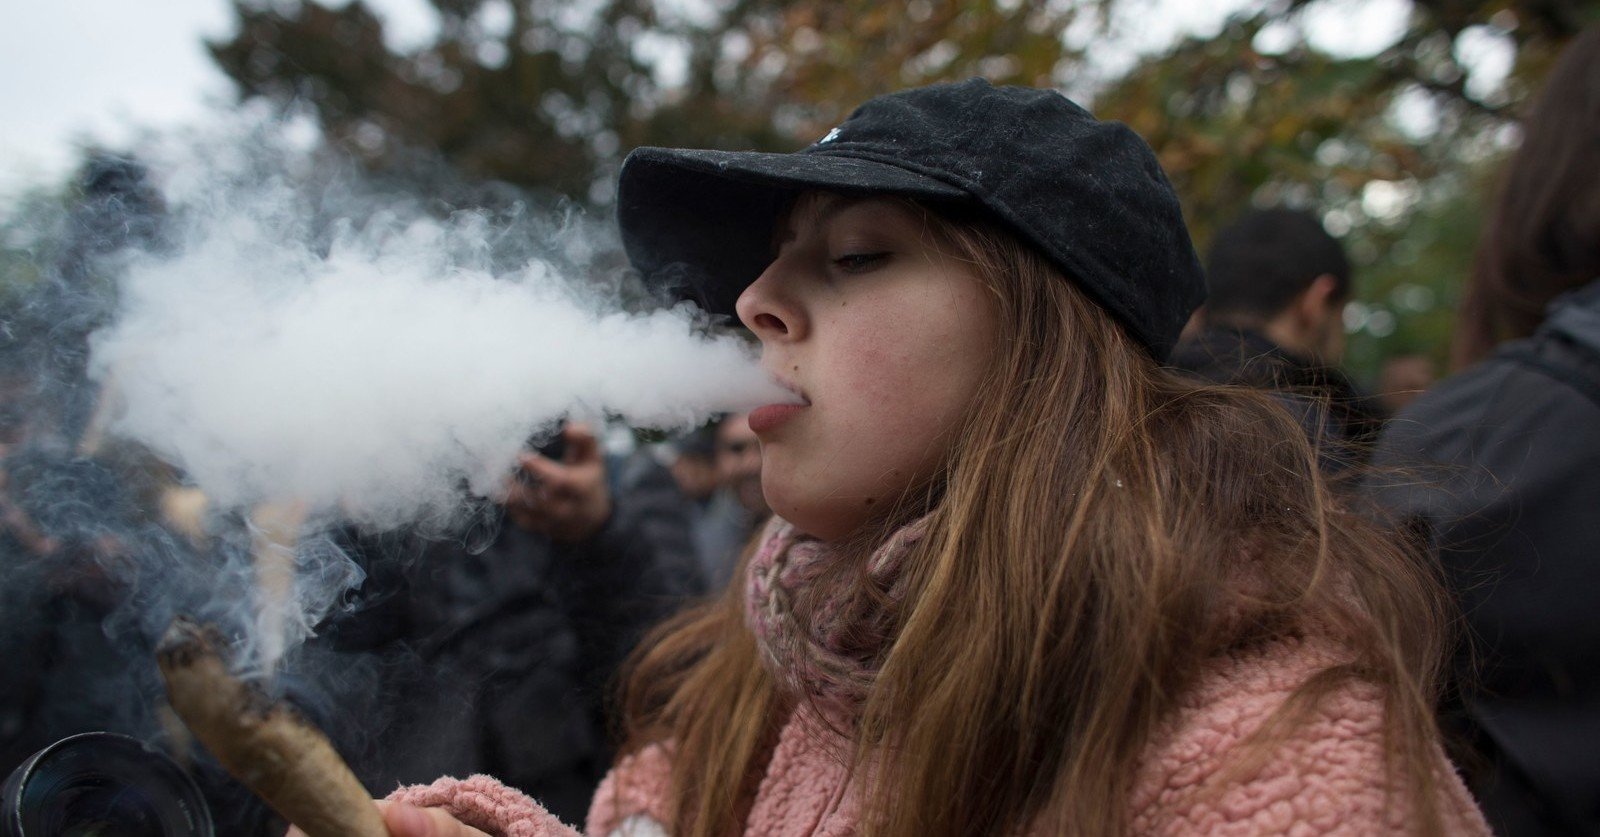 Half Of Americans Think The Smell Of Weed In Public Is A Real Problem